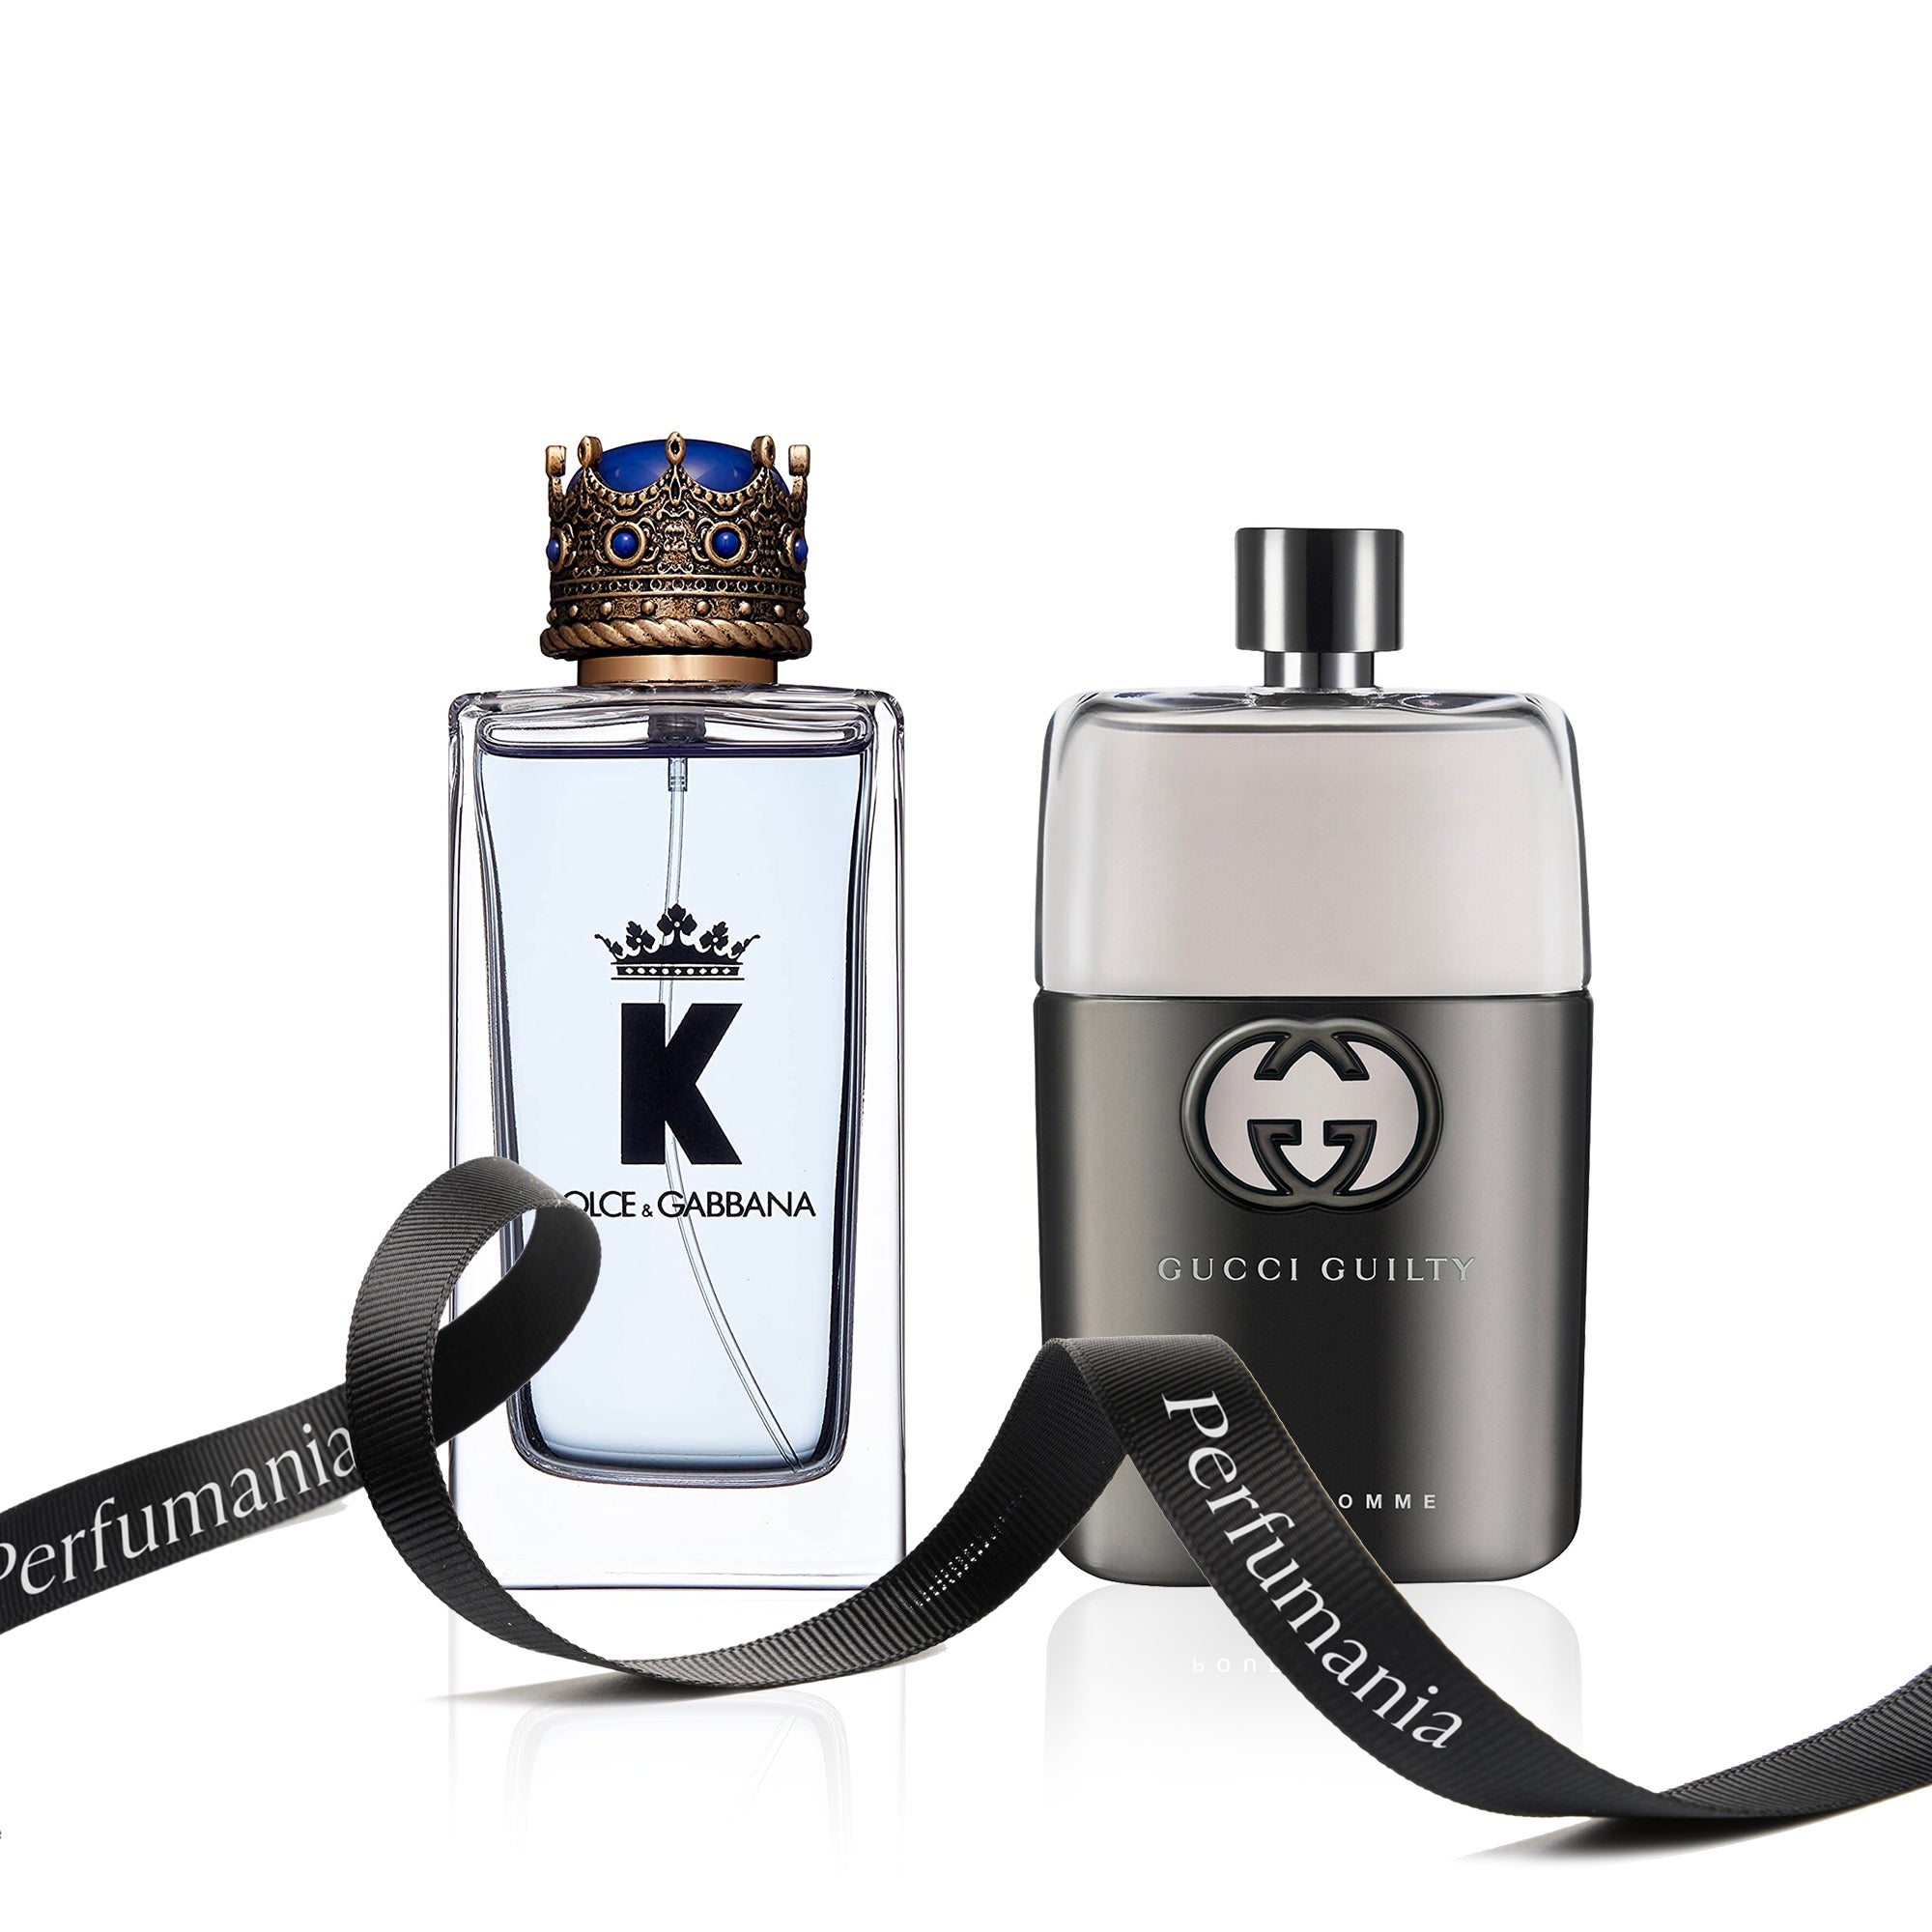 Bundle for Men: K by Dolce & Gabbana and Gucci Guilty by Gucci Featured image